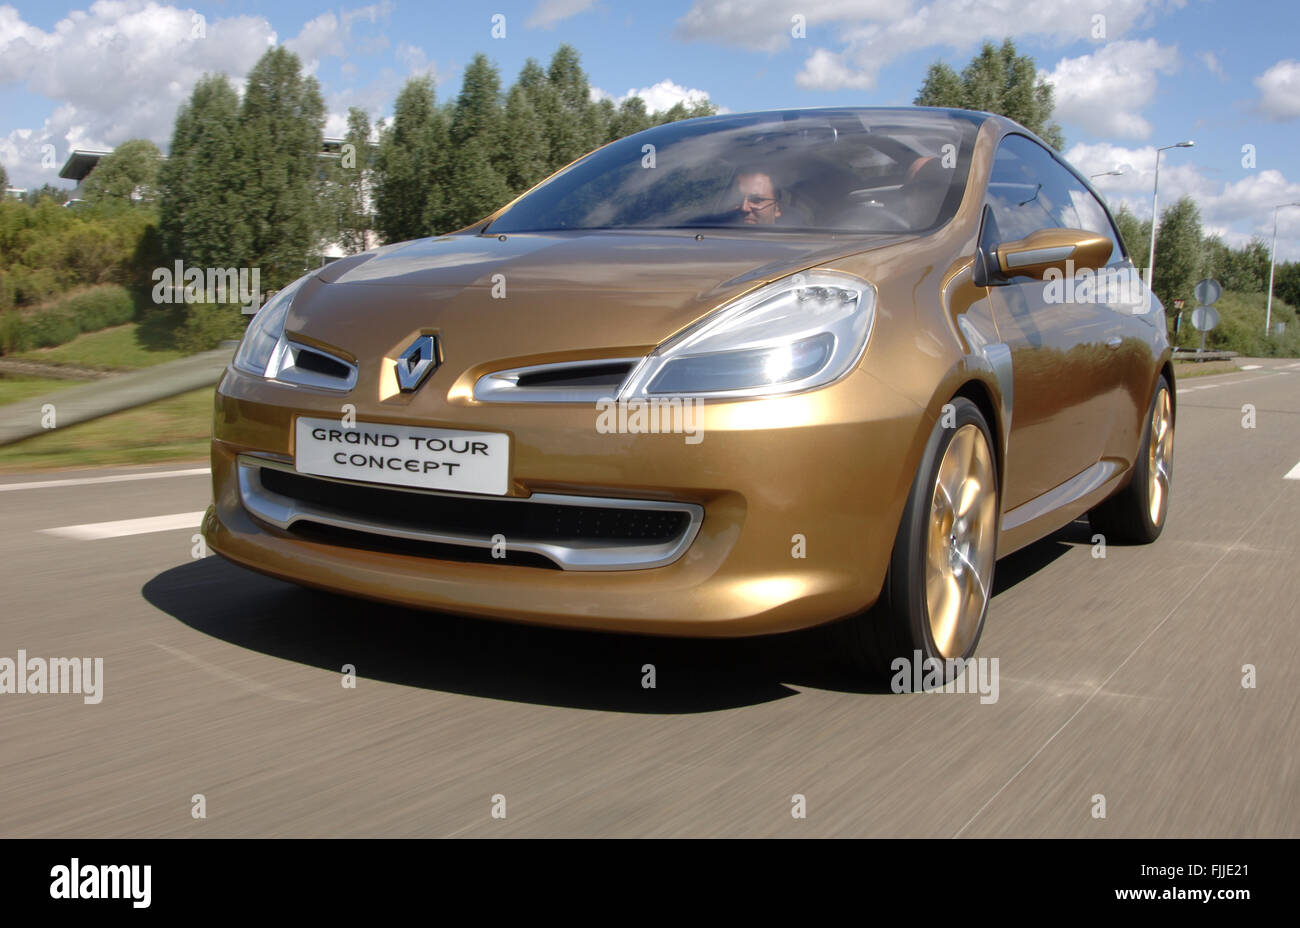 2007 Renault Grand Tour Concept car, styling exercise which led the Mk 4 Clio 2012 Stock Photo - Alamy